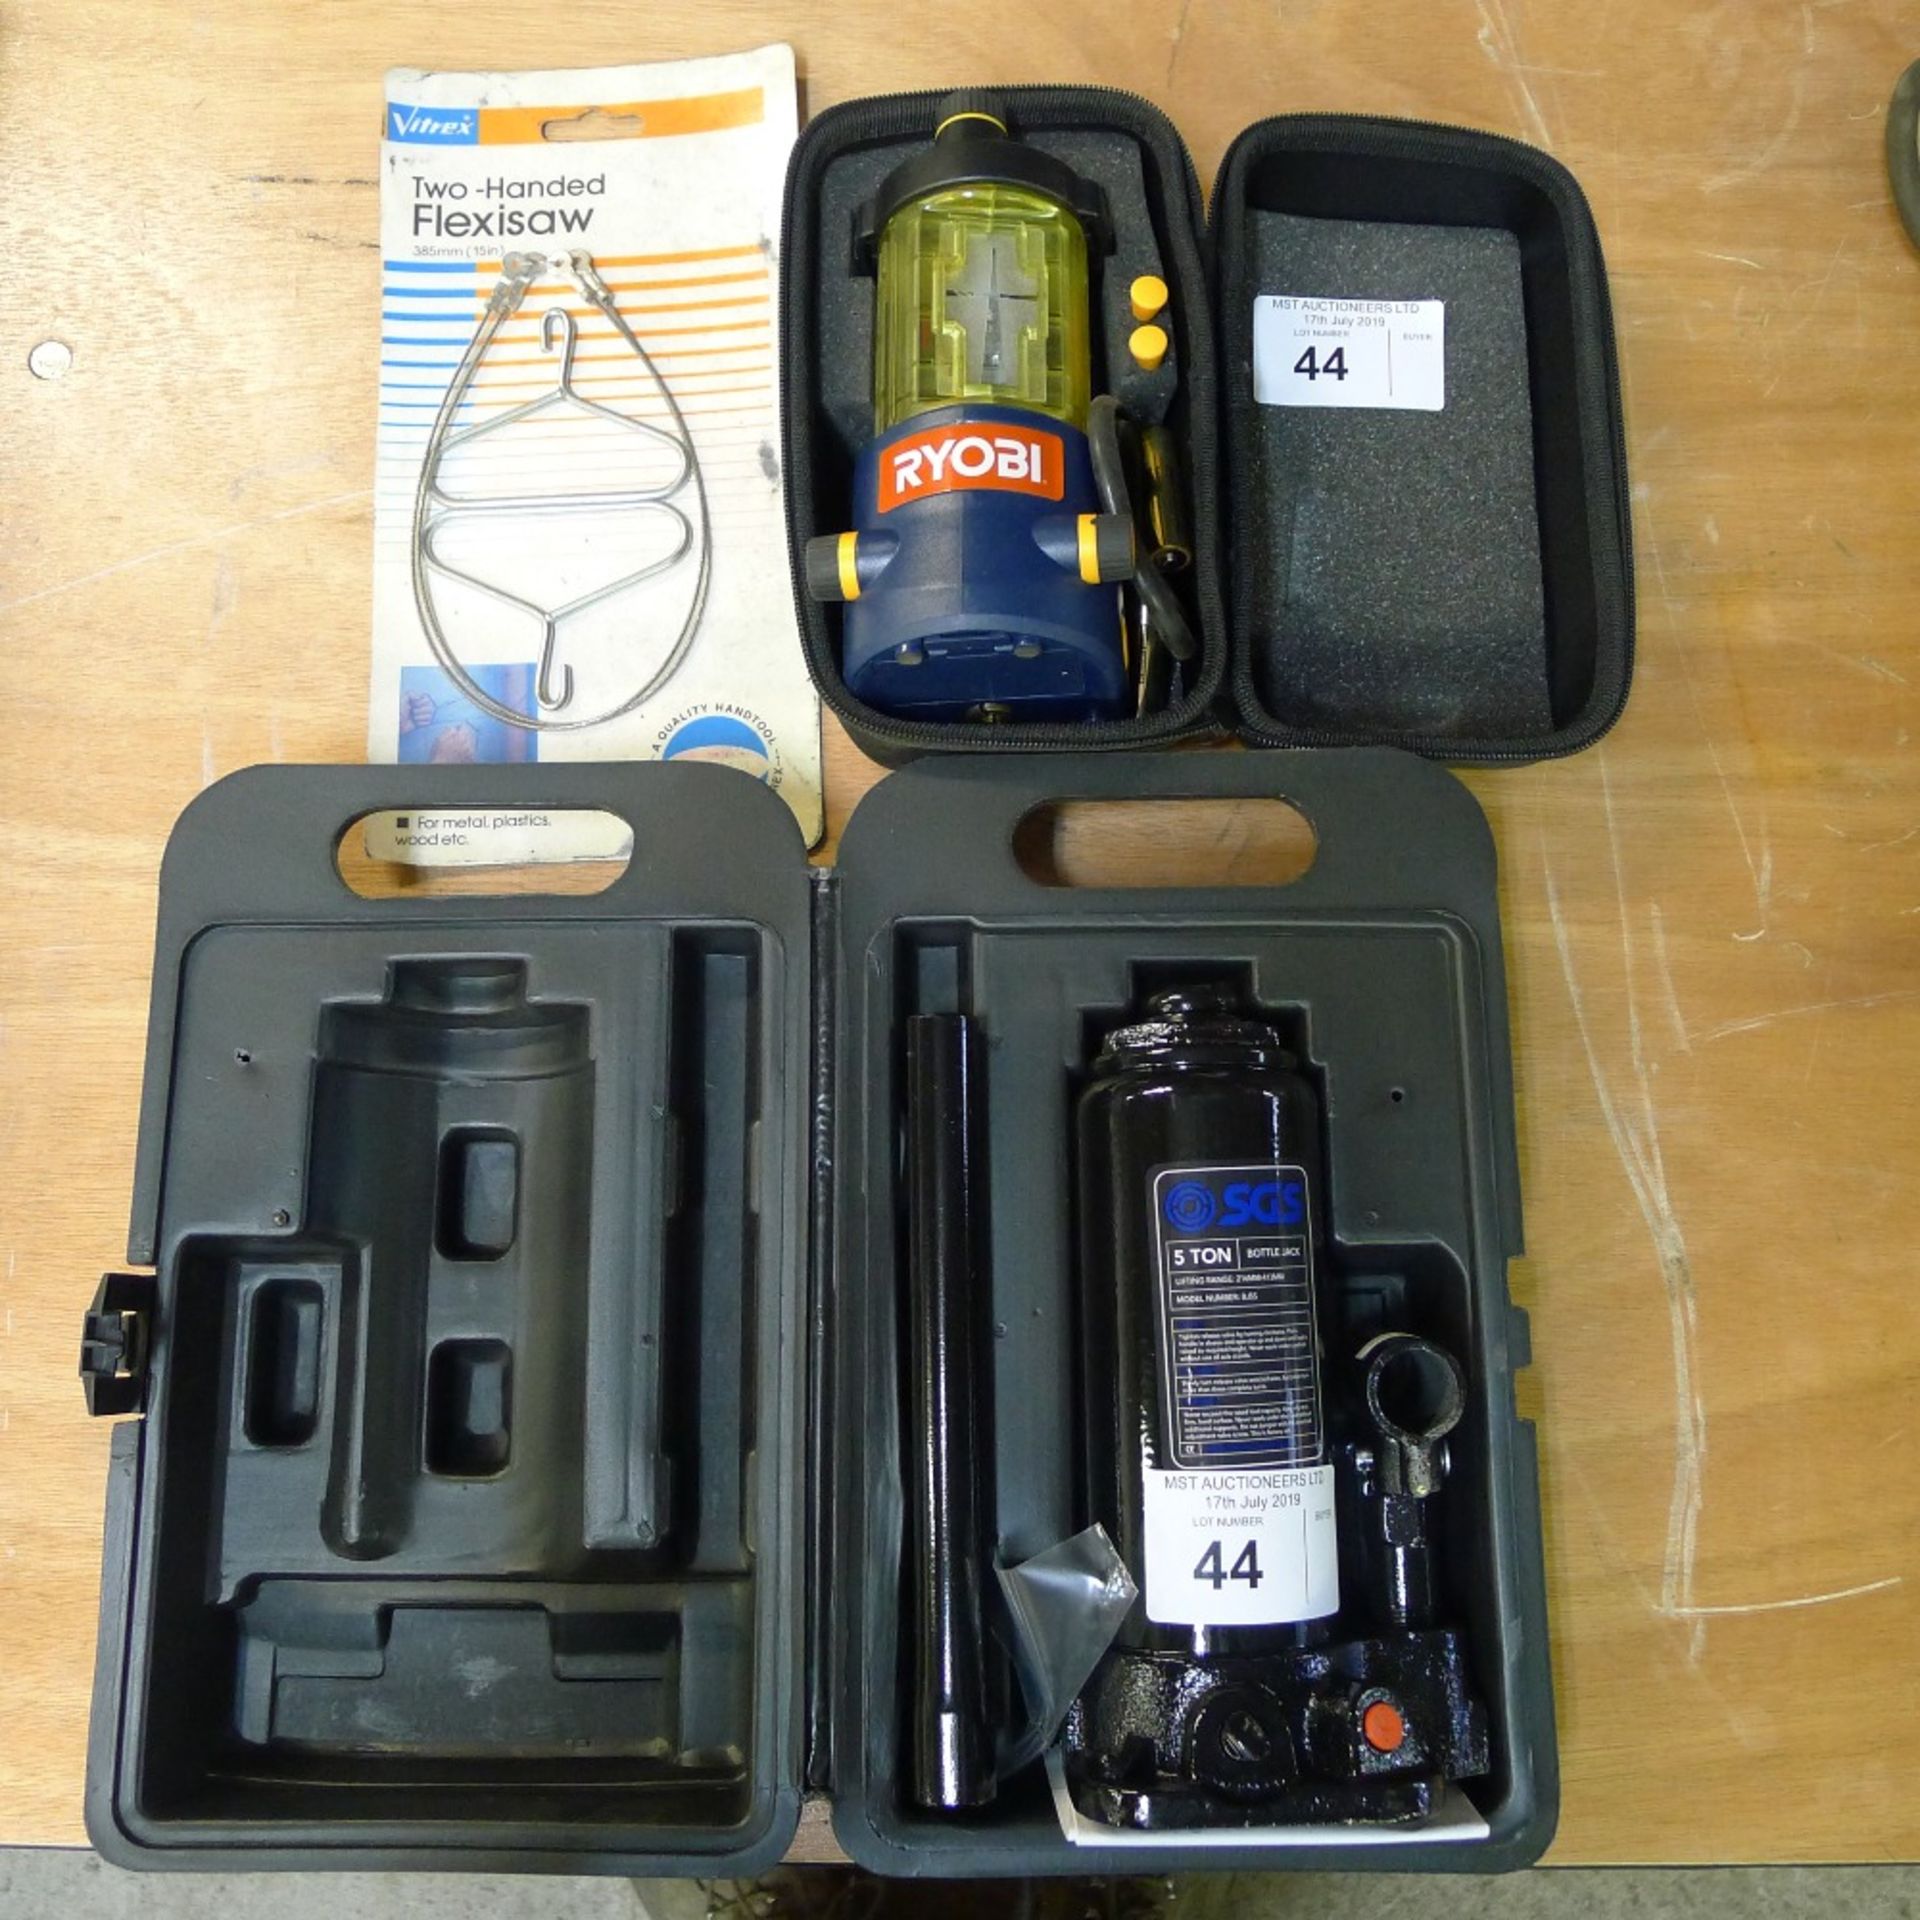 1 SGS 5 ton bottle jack, 1 Ryobi Air Grip laser level and 1 Vitrex two handed flexi saw